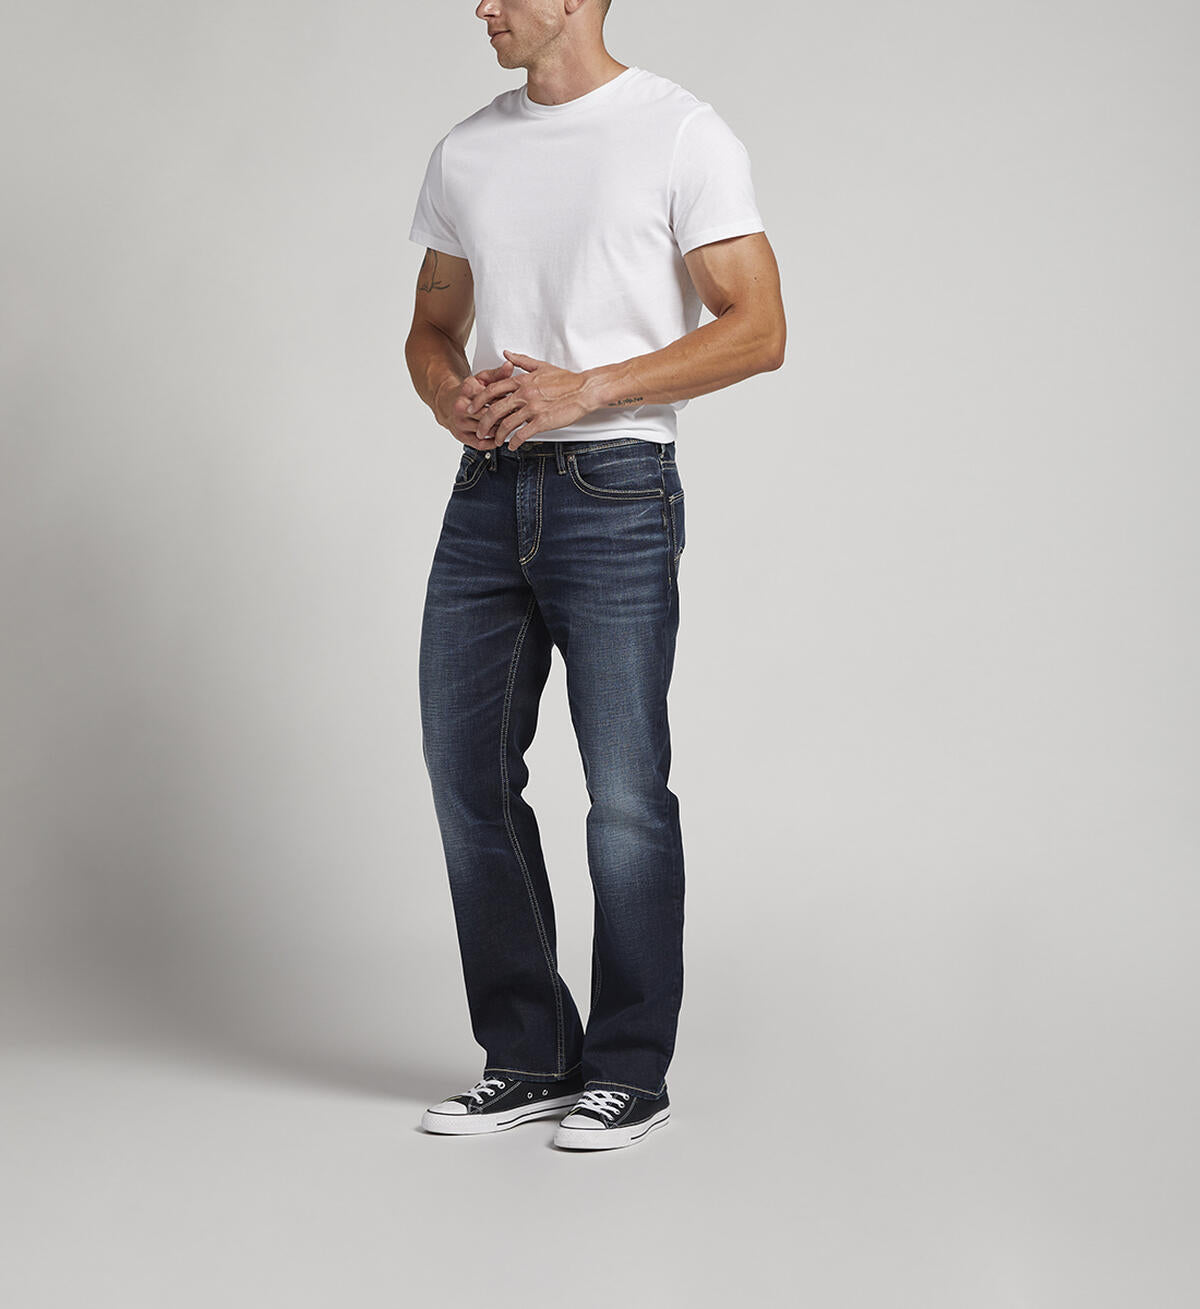 SILVER JEANS-Gordie Relaxed Fit Straight Leg Jeans